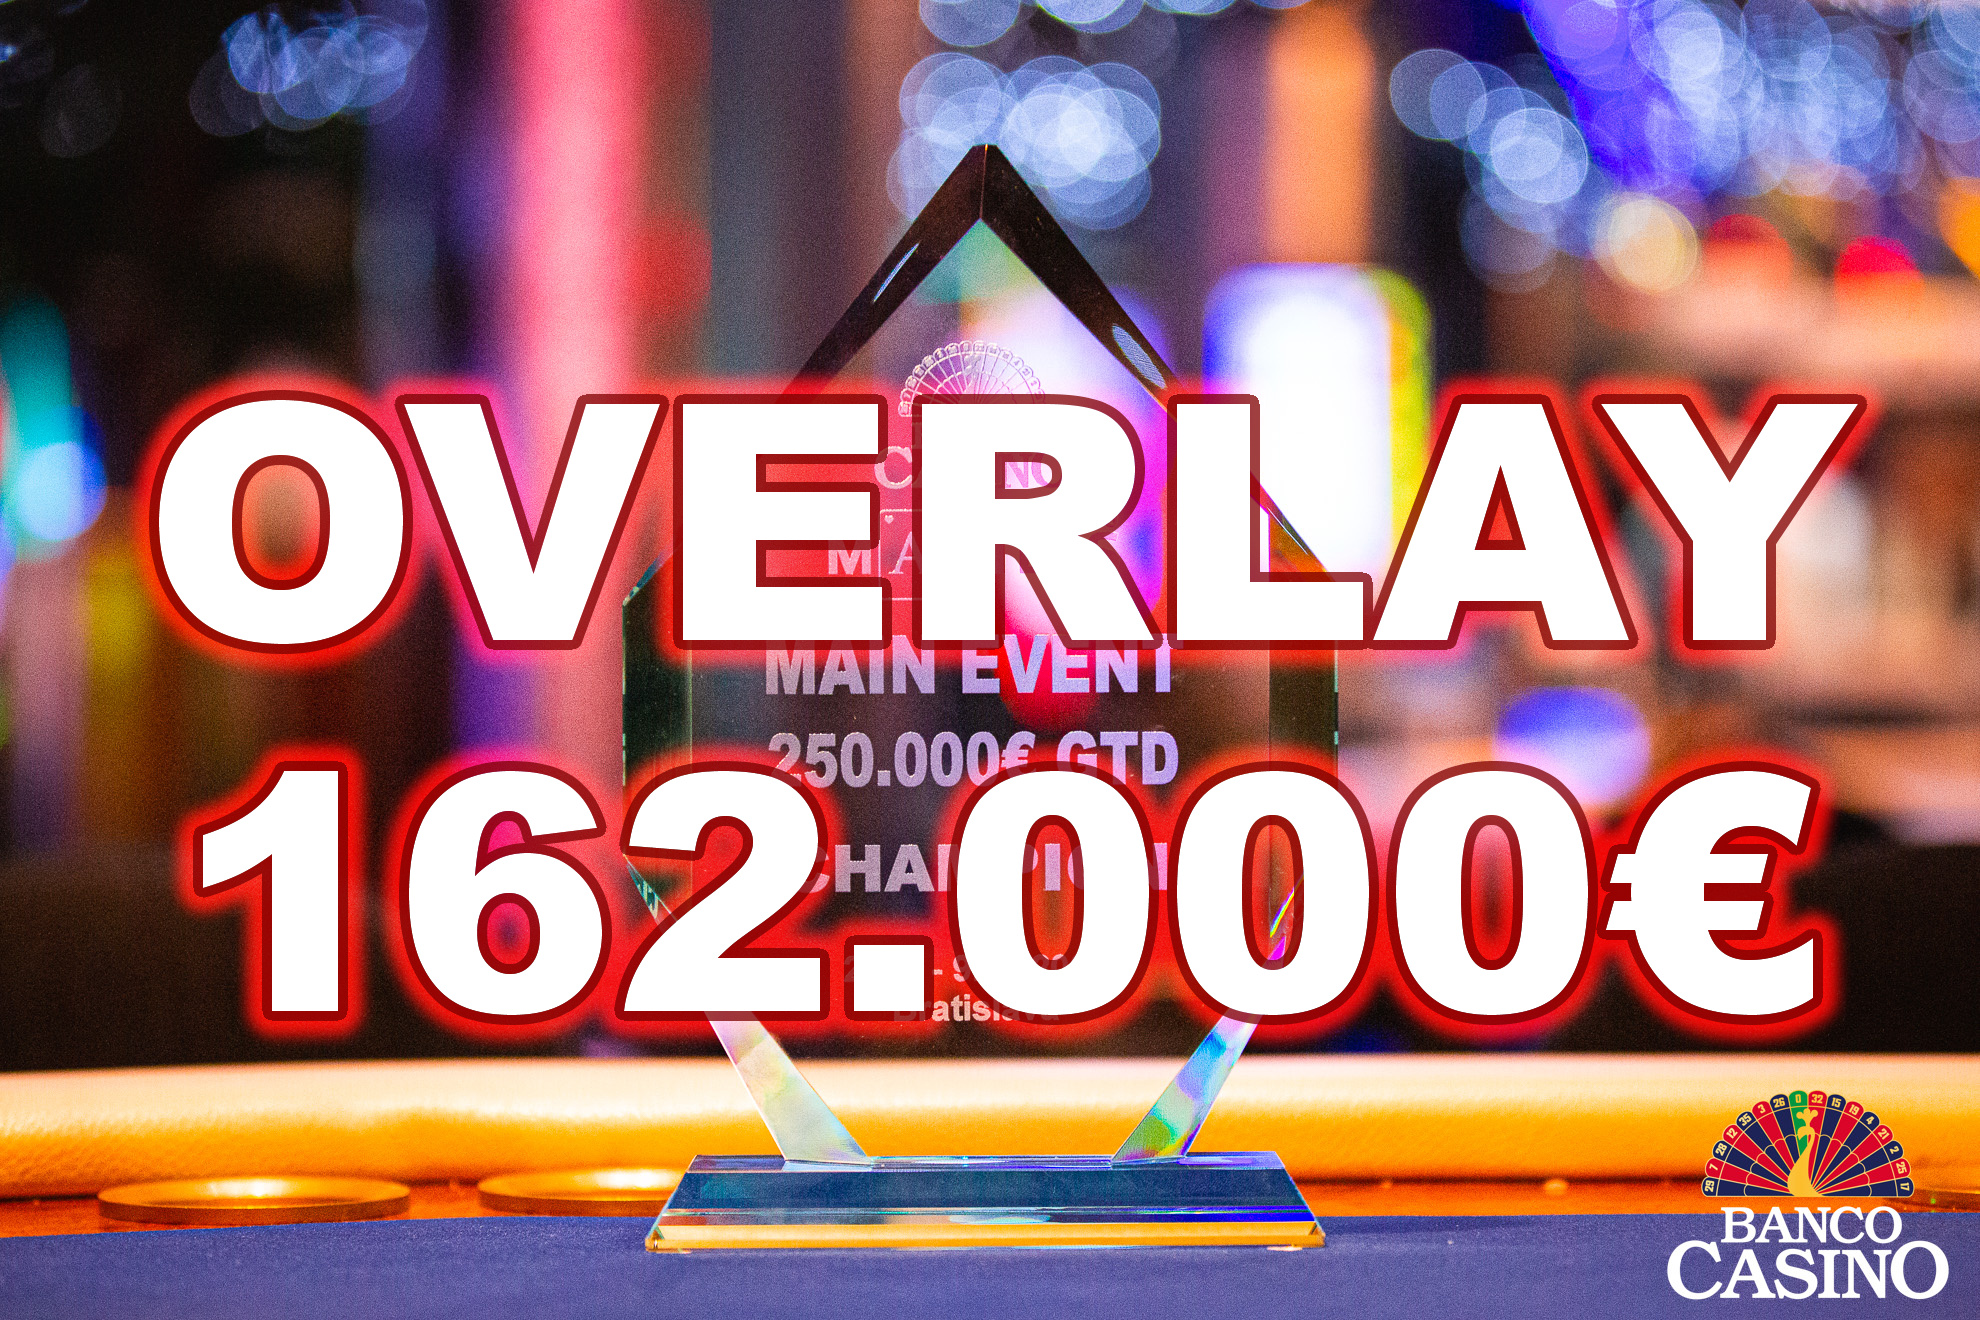 EARLIER TODAY BANCO CASINO MASTERS REPORTS A HUGE 162,000€ OVERLAY!